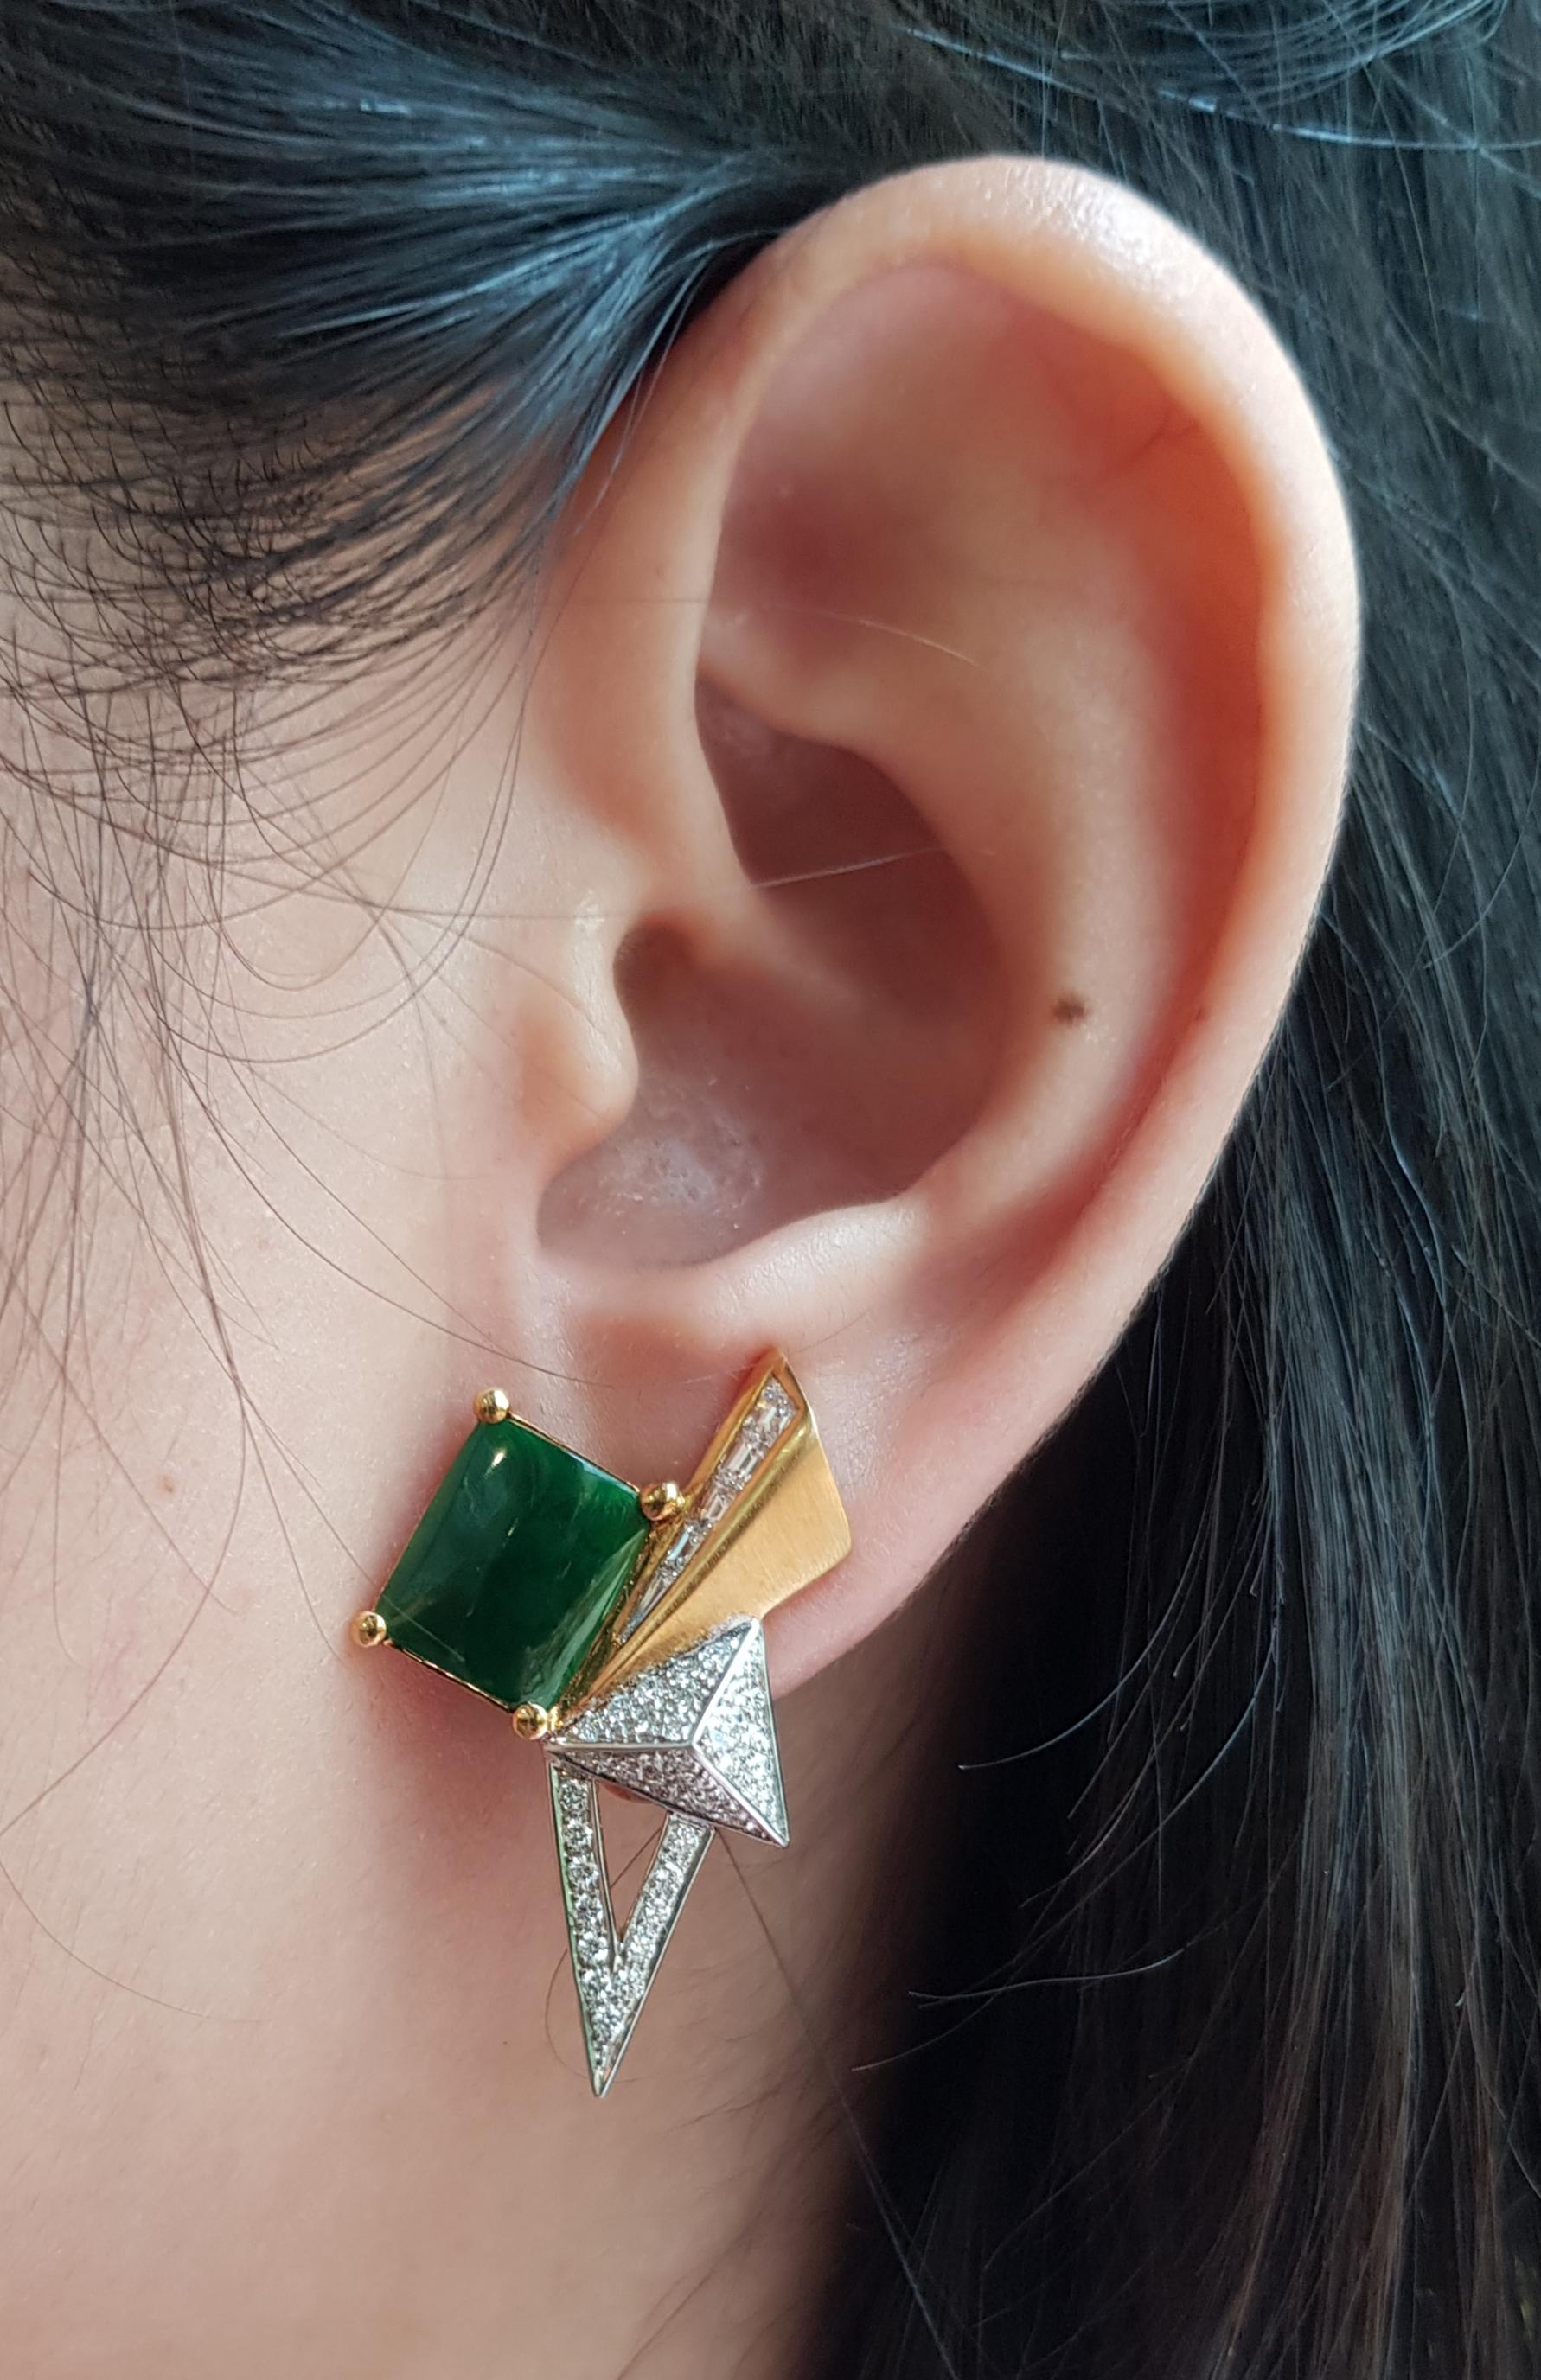 Jade 3.01 carats with Diamond 1.13 carats Earrings set in 18 Karat White Gold Settings

Width:  2.2 cm 
Length: 3.4 cm
Total Weight: 12.31 grams

The ancient Japanese tradition of paper folding has inspired the form and elements of this modern